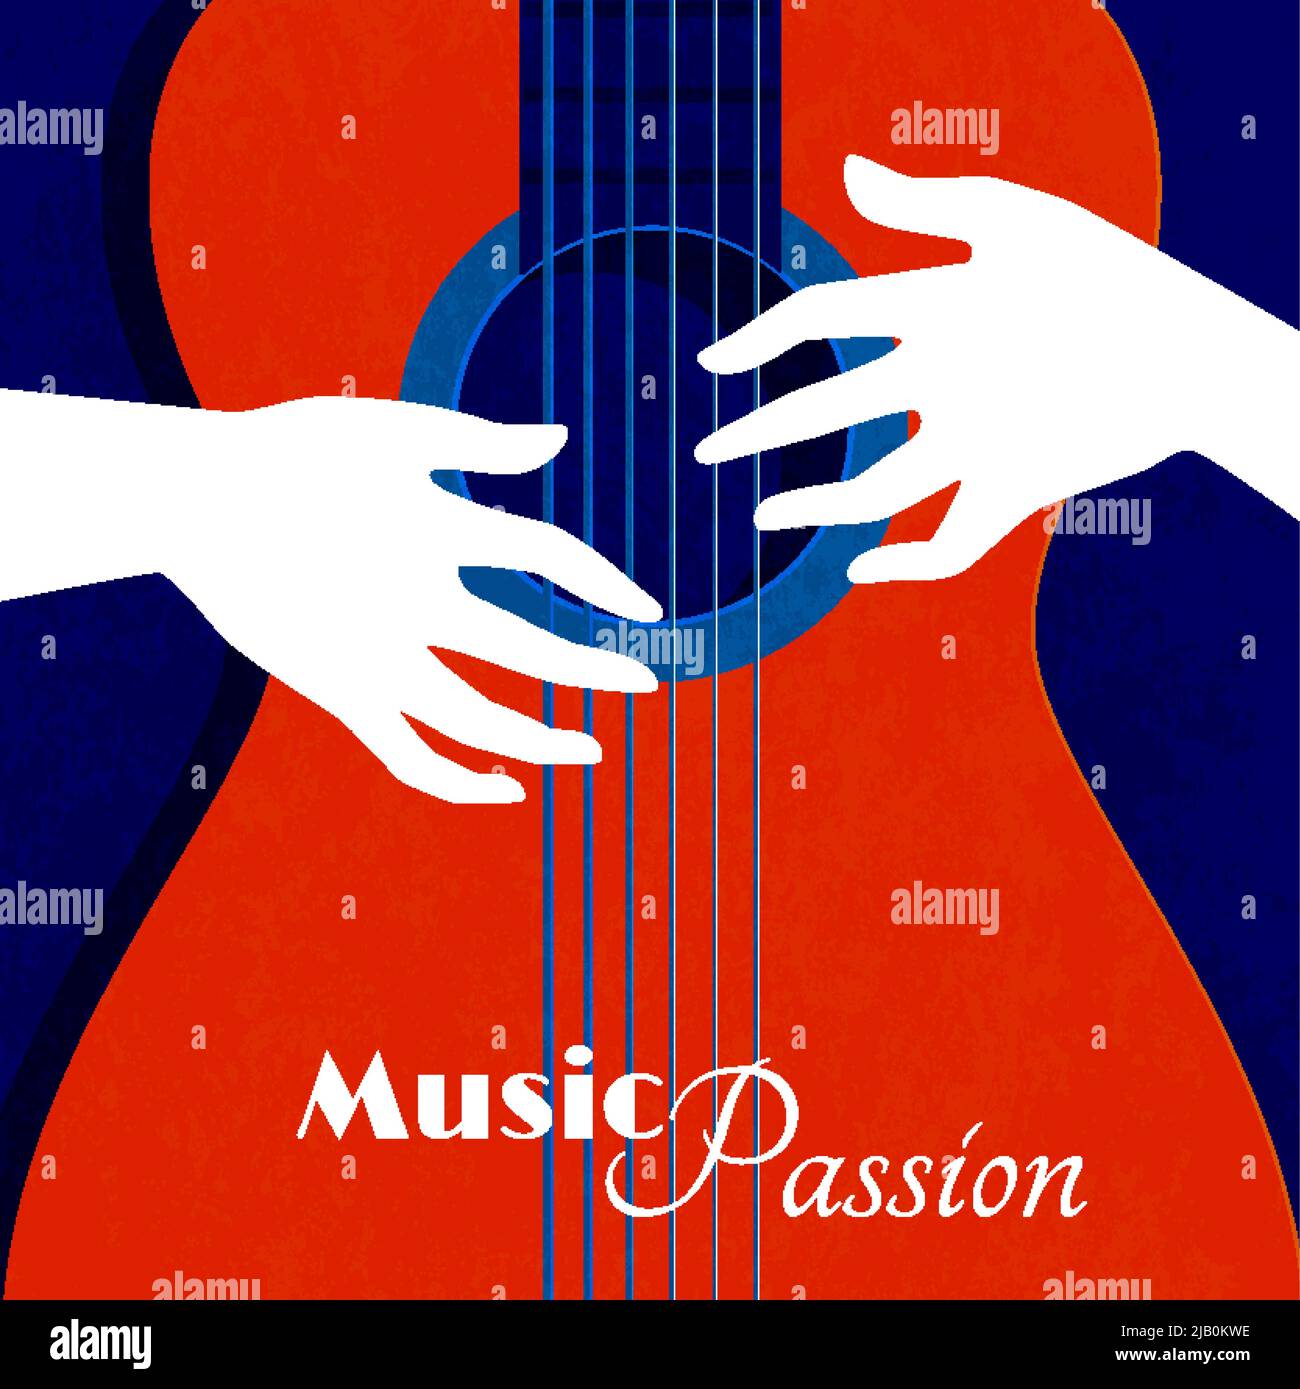 Music passion poster with red guitar silhouette on blue background and male hands on strings flat vector illustration Stock Vector